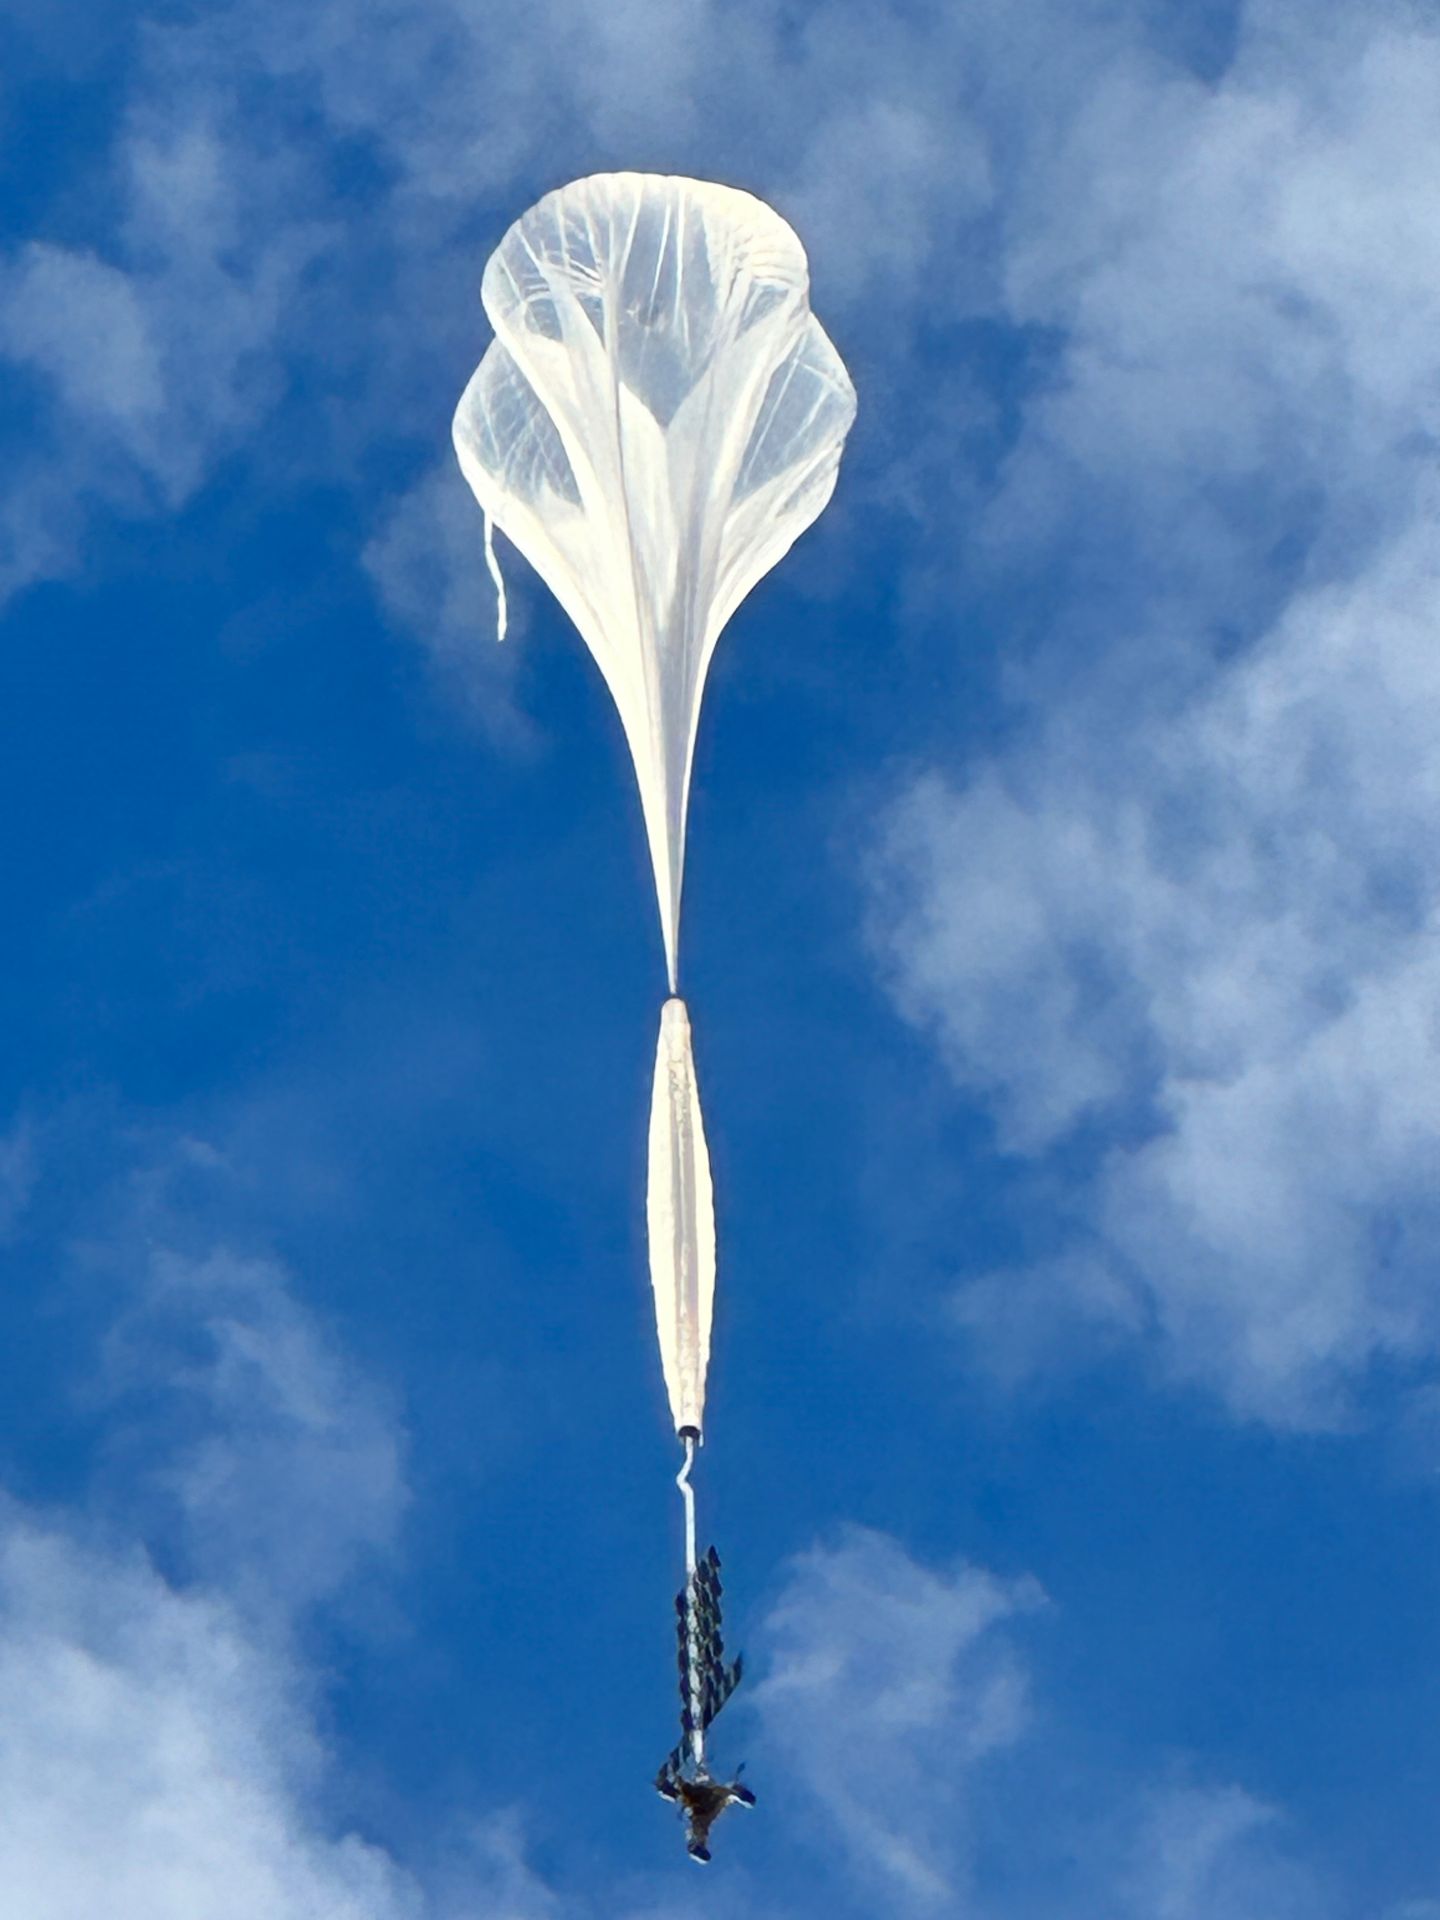 The stratollite balloon ascending above Page (Image: SET)